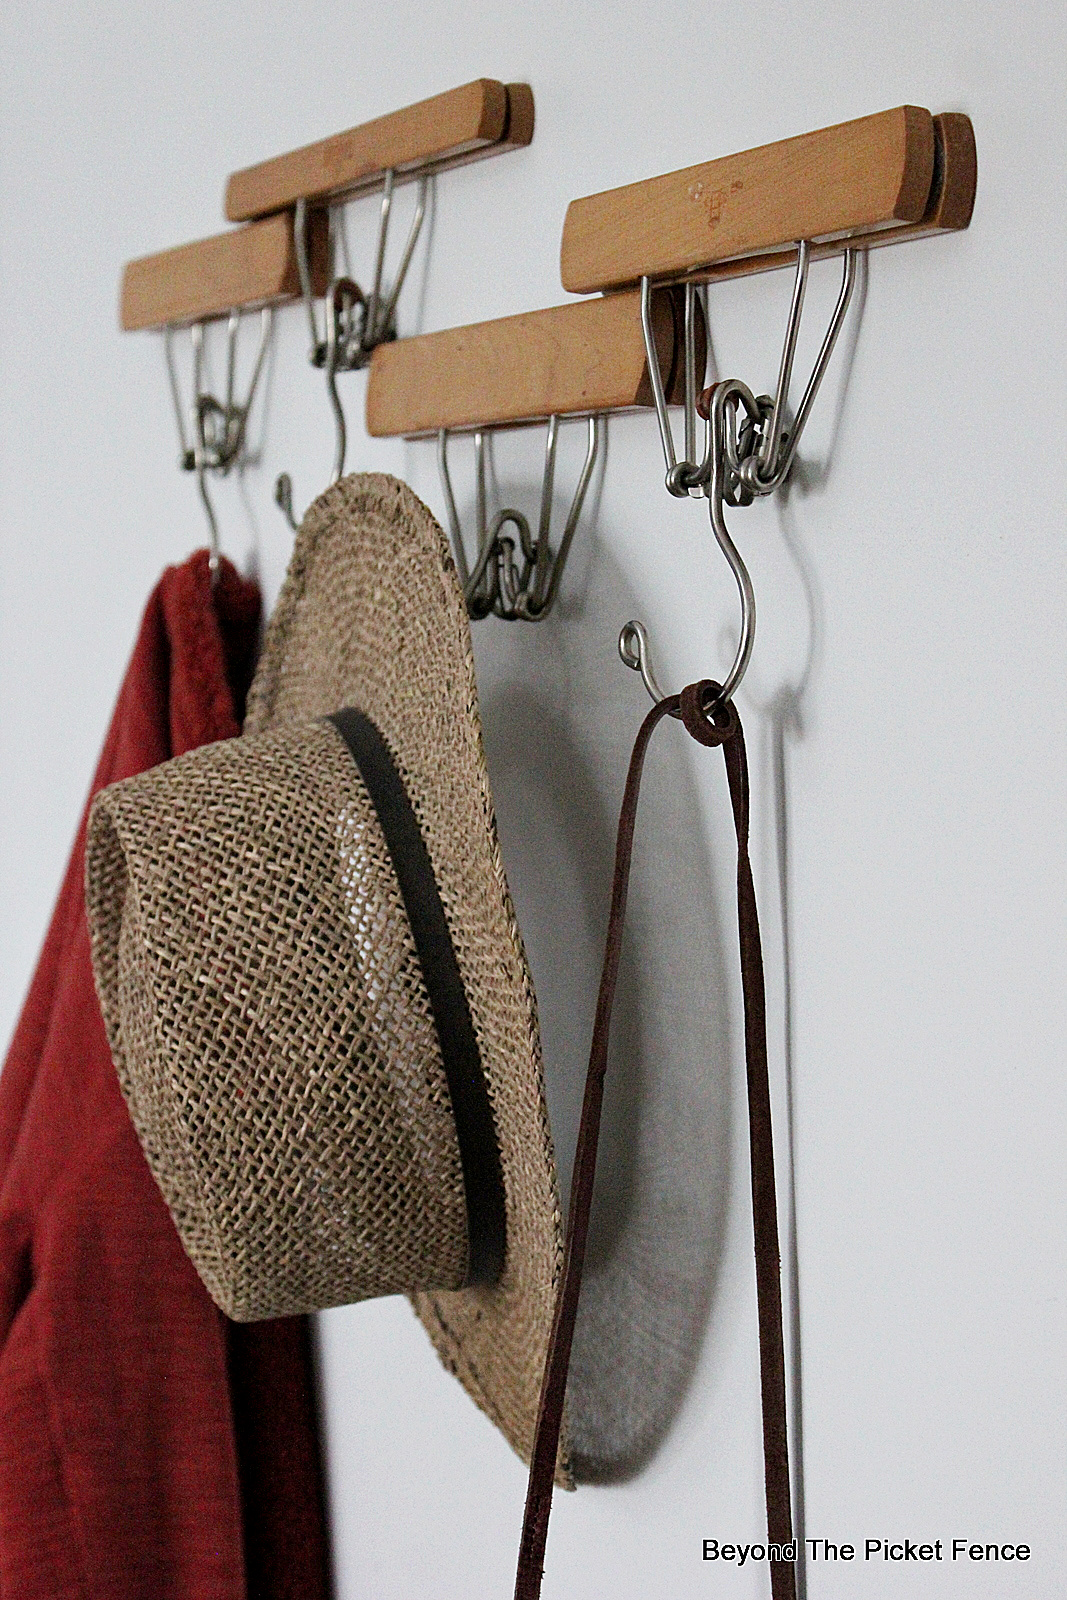 Beyond The Picket Fence: Rustic Boho Bedroom Seating Area and DIY Coat Hook